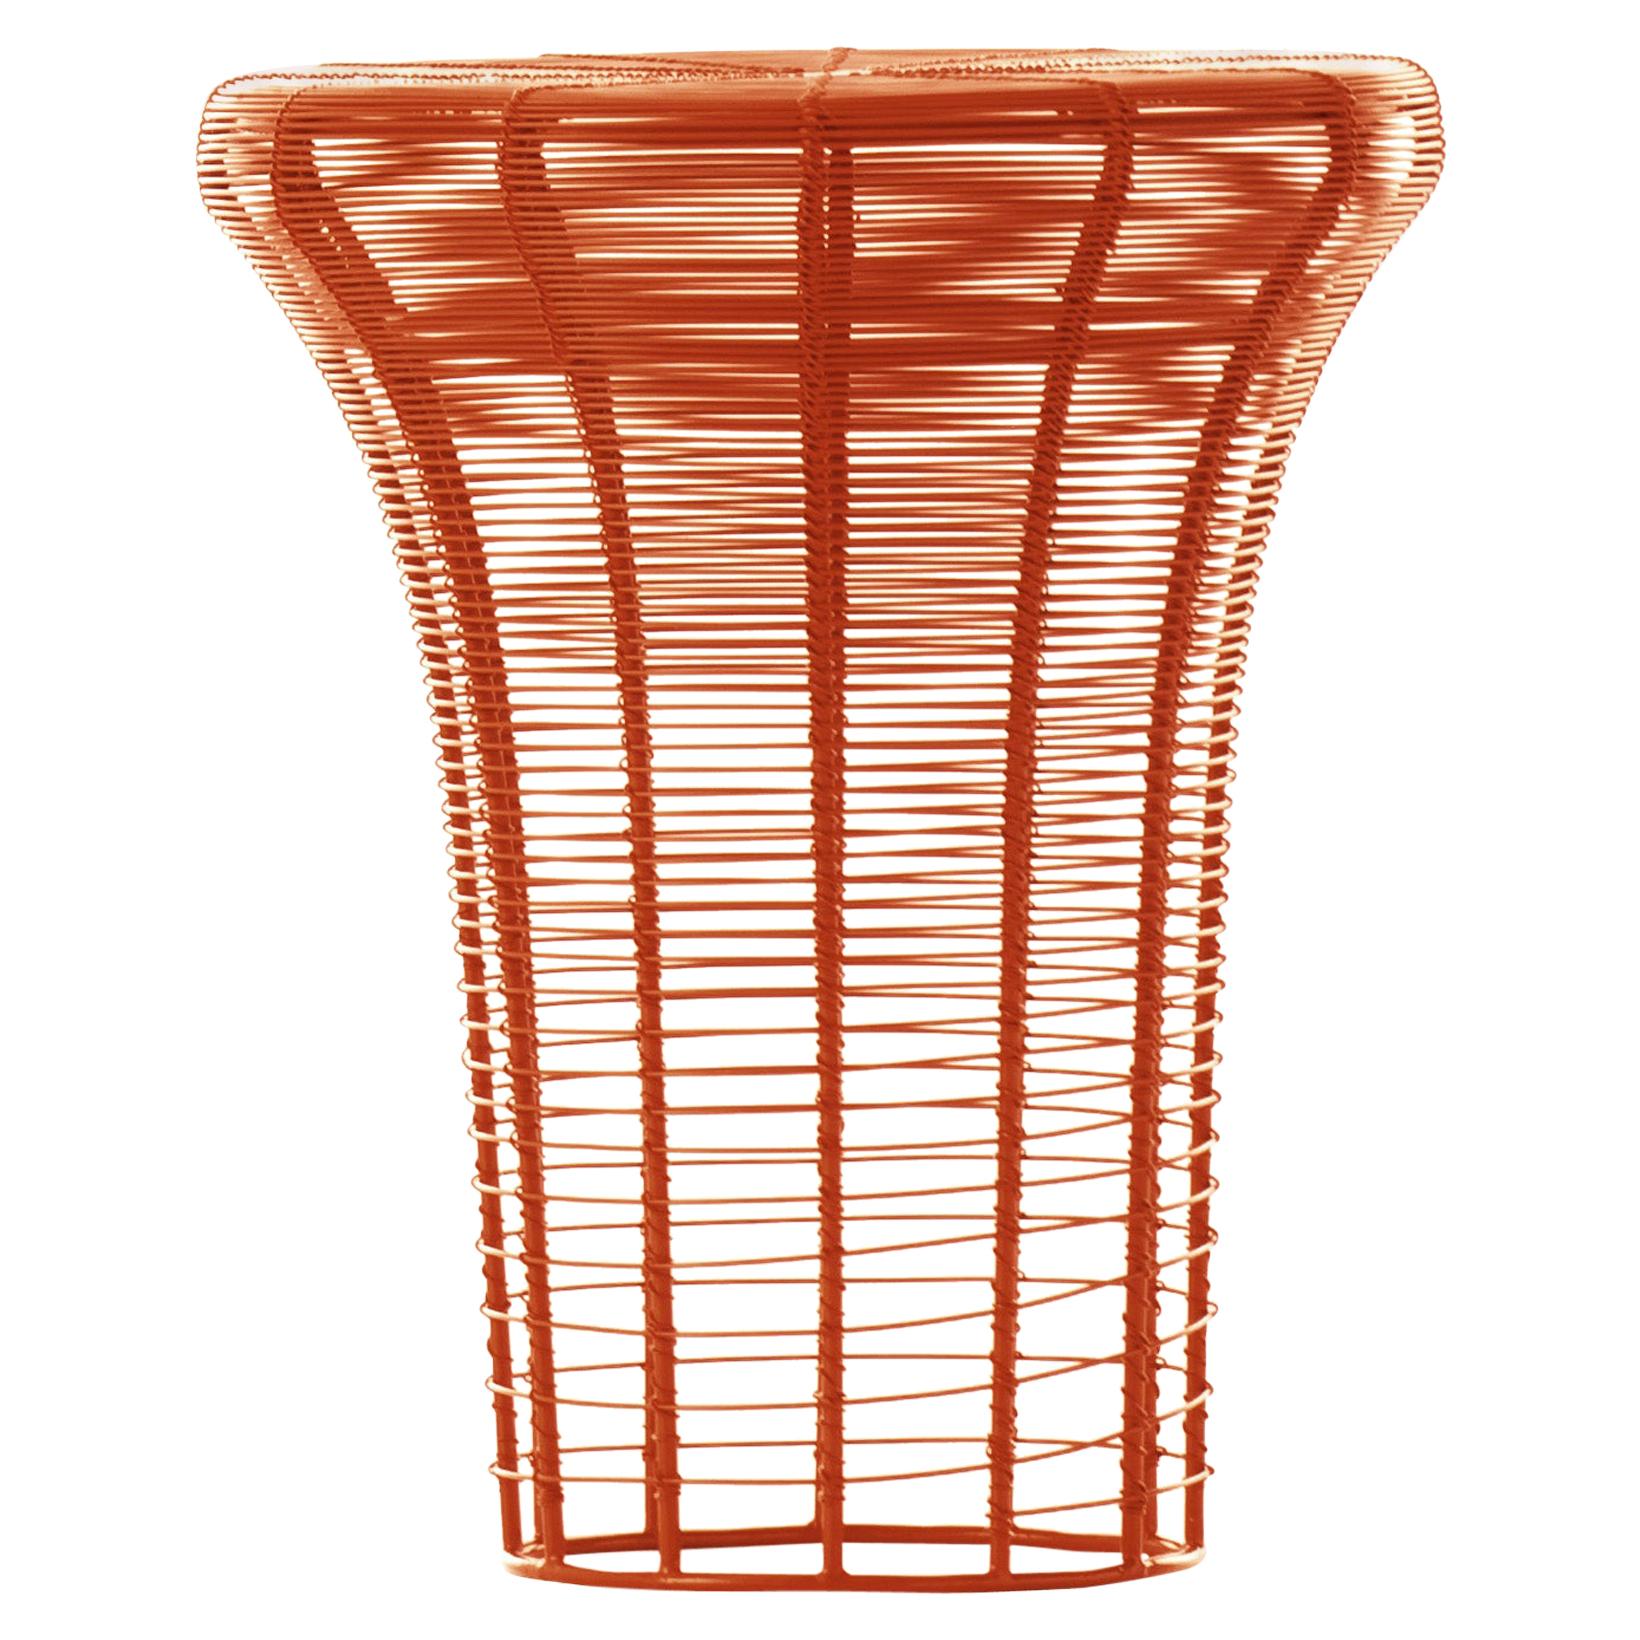 GAN Aram High Stool in Red and Orange by Nendo For Sale